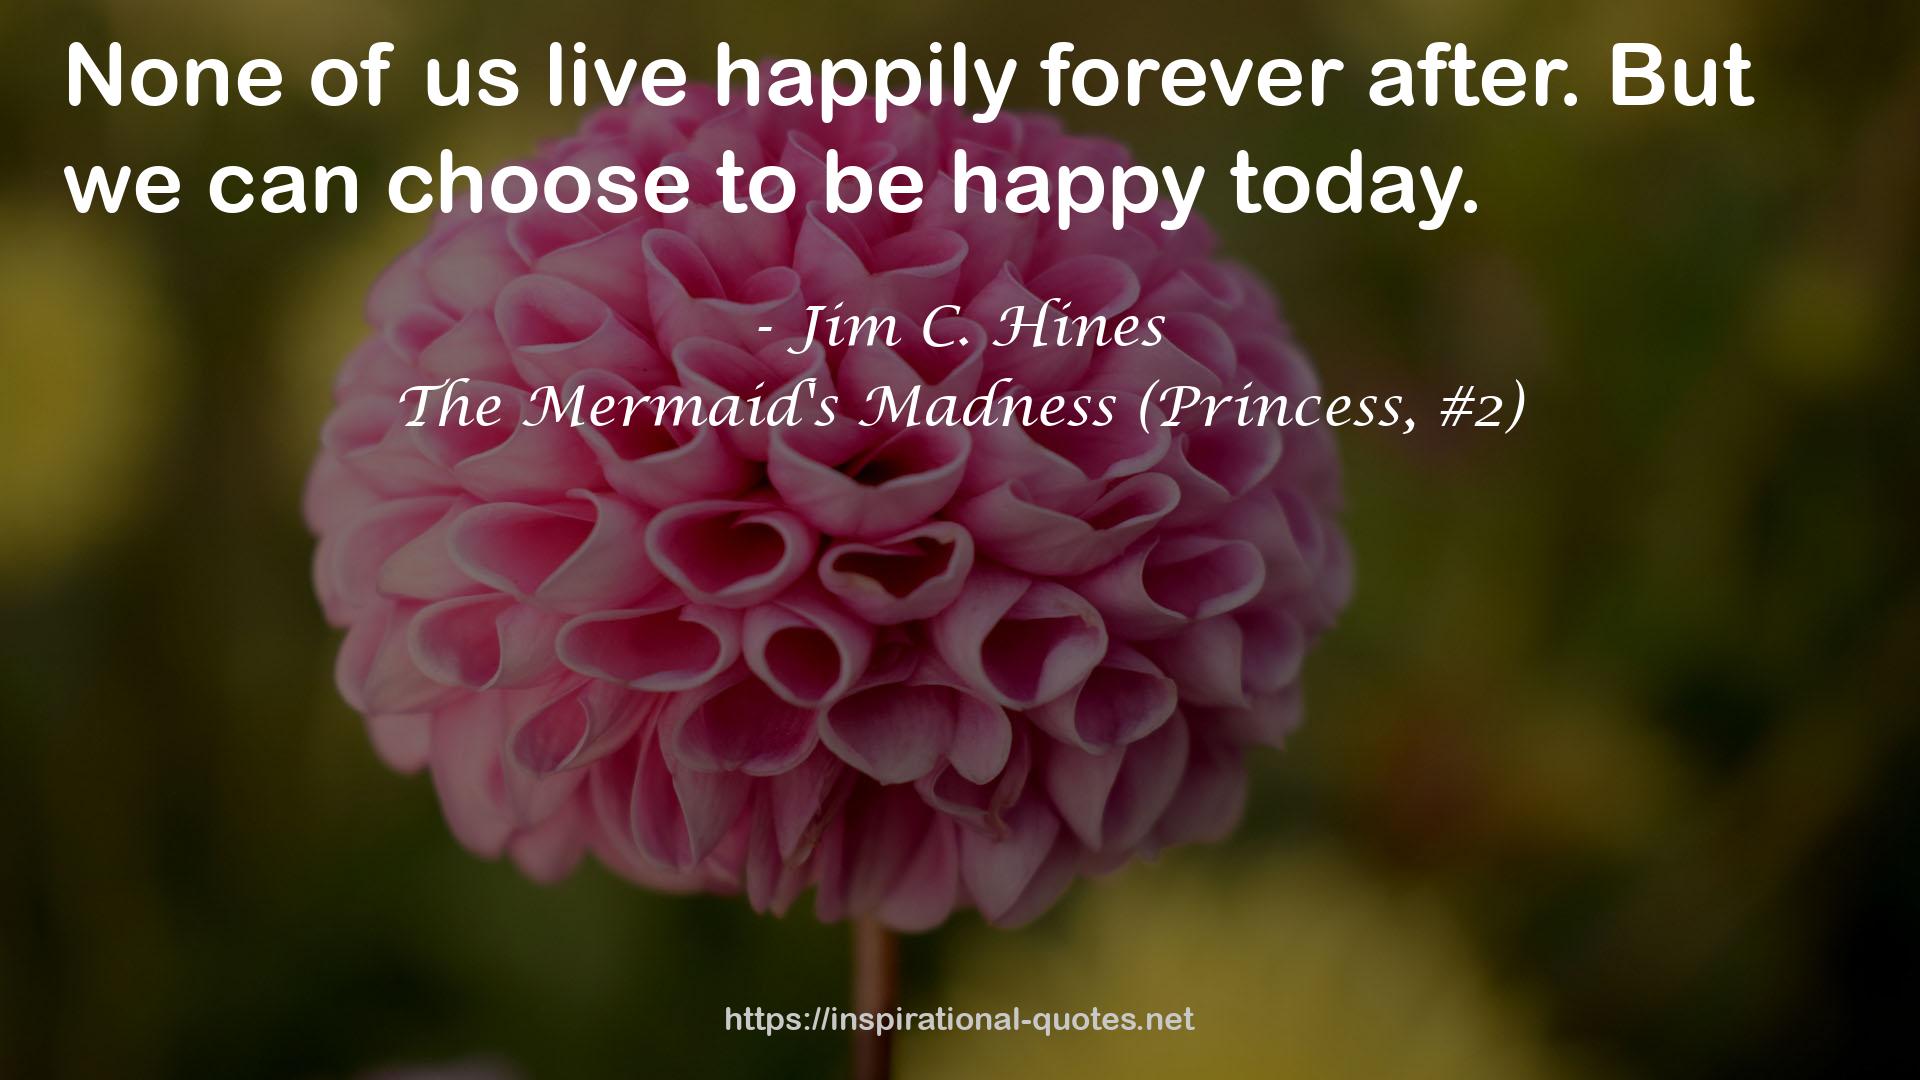 The Mermaid's Madness (Princess, #2) QUOTES